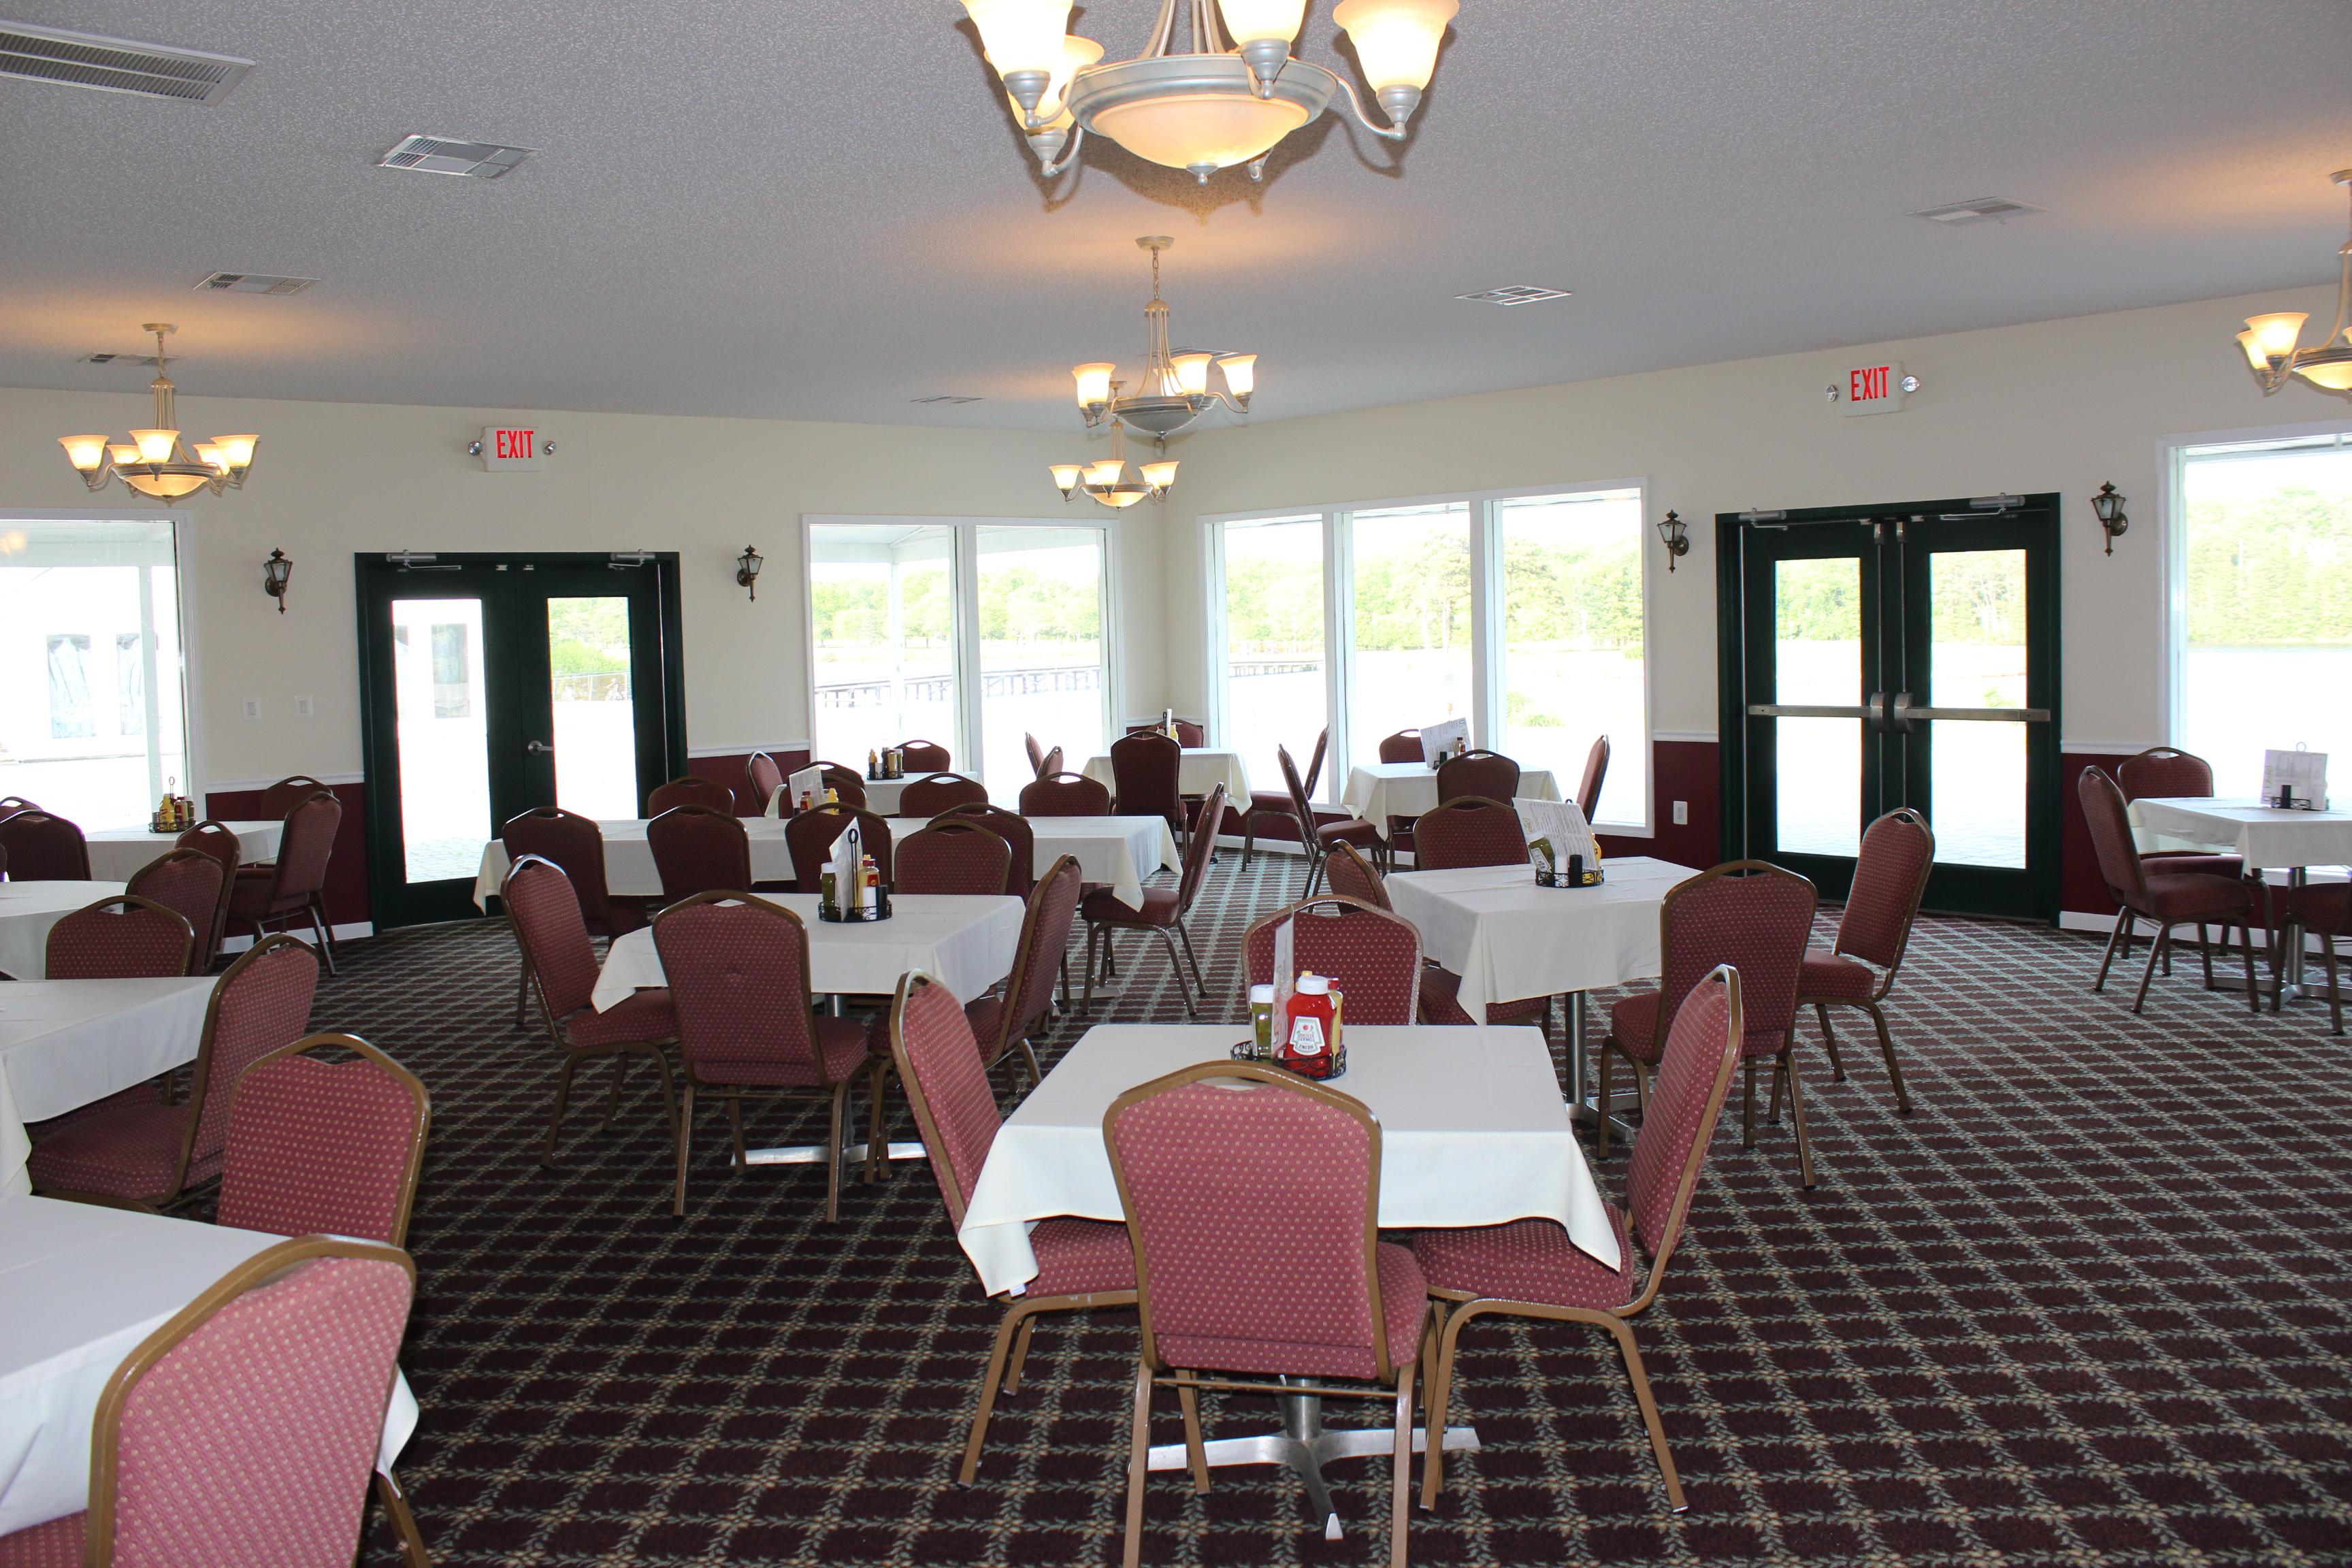 Several tables and chairs set with table cloths, condiments, and menus are arranged throughout the carpeted room. Various light fixtures and natural light from the large wall windows light the room. The tables are primarily four tops but there are also tables that seat groups of 6.